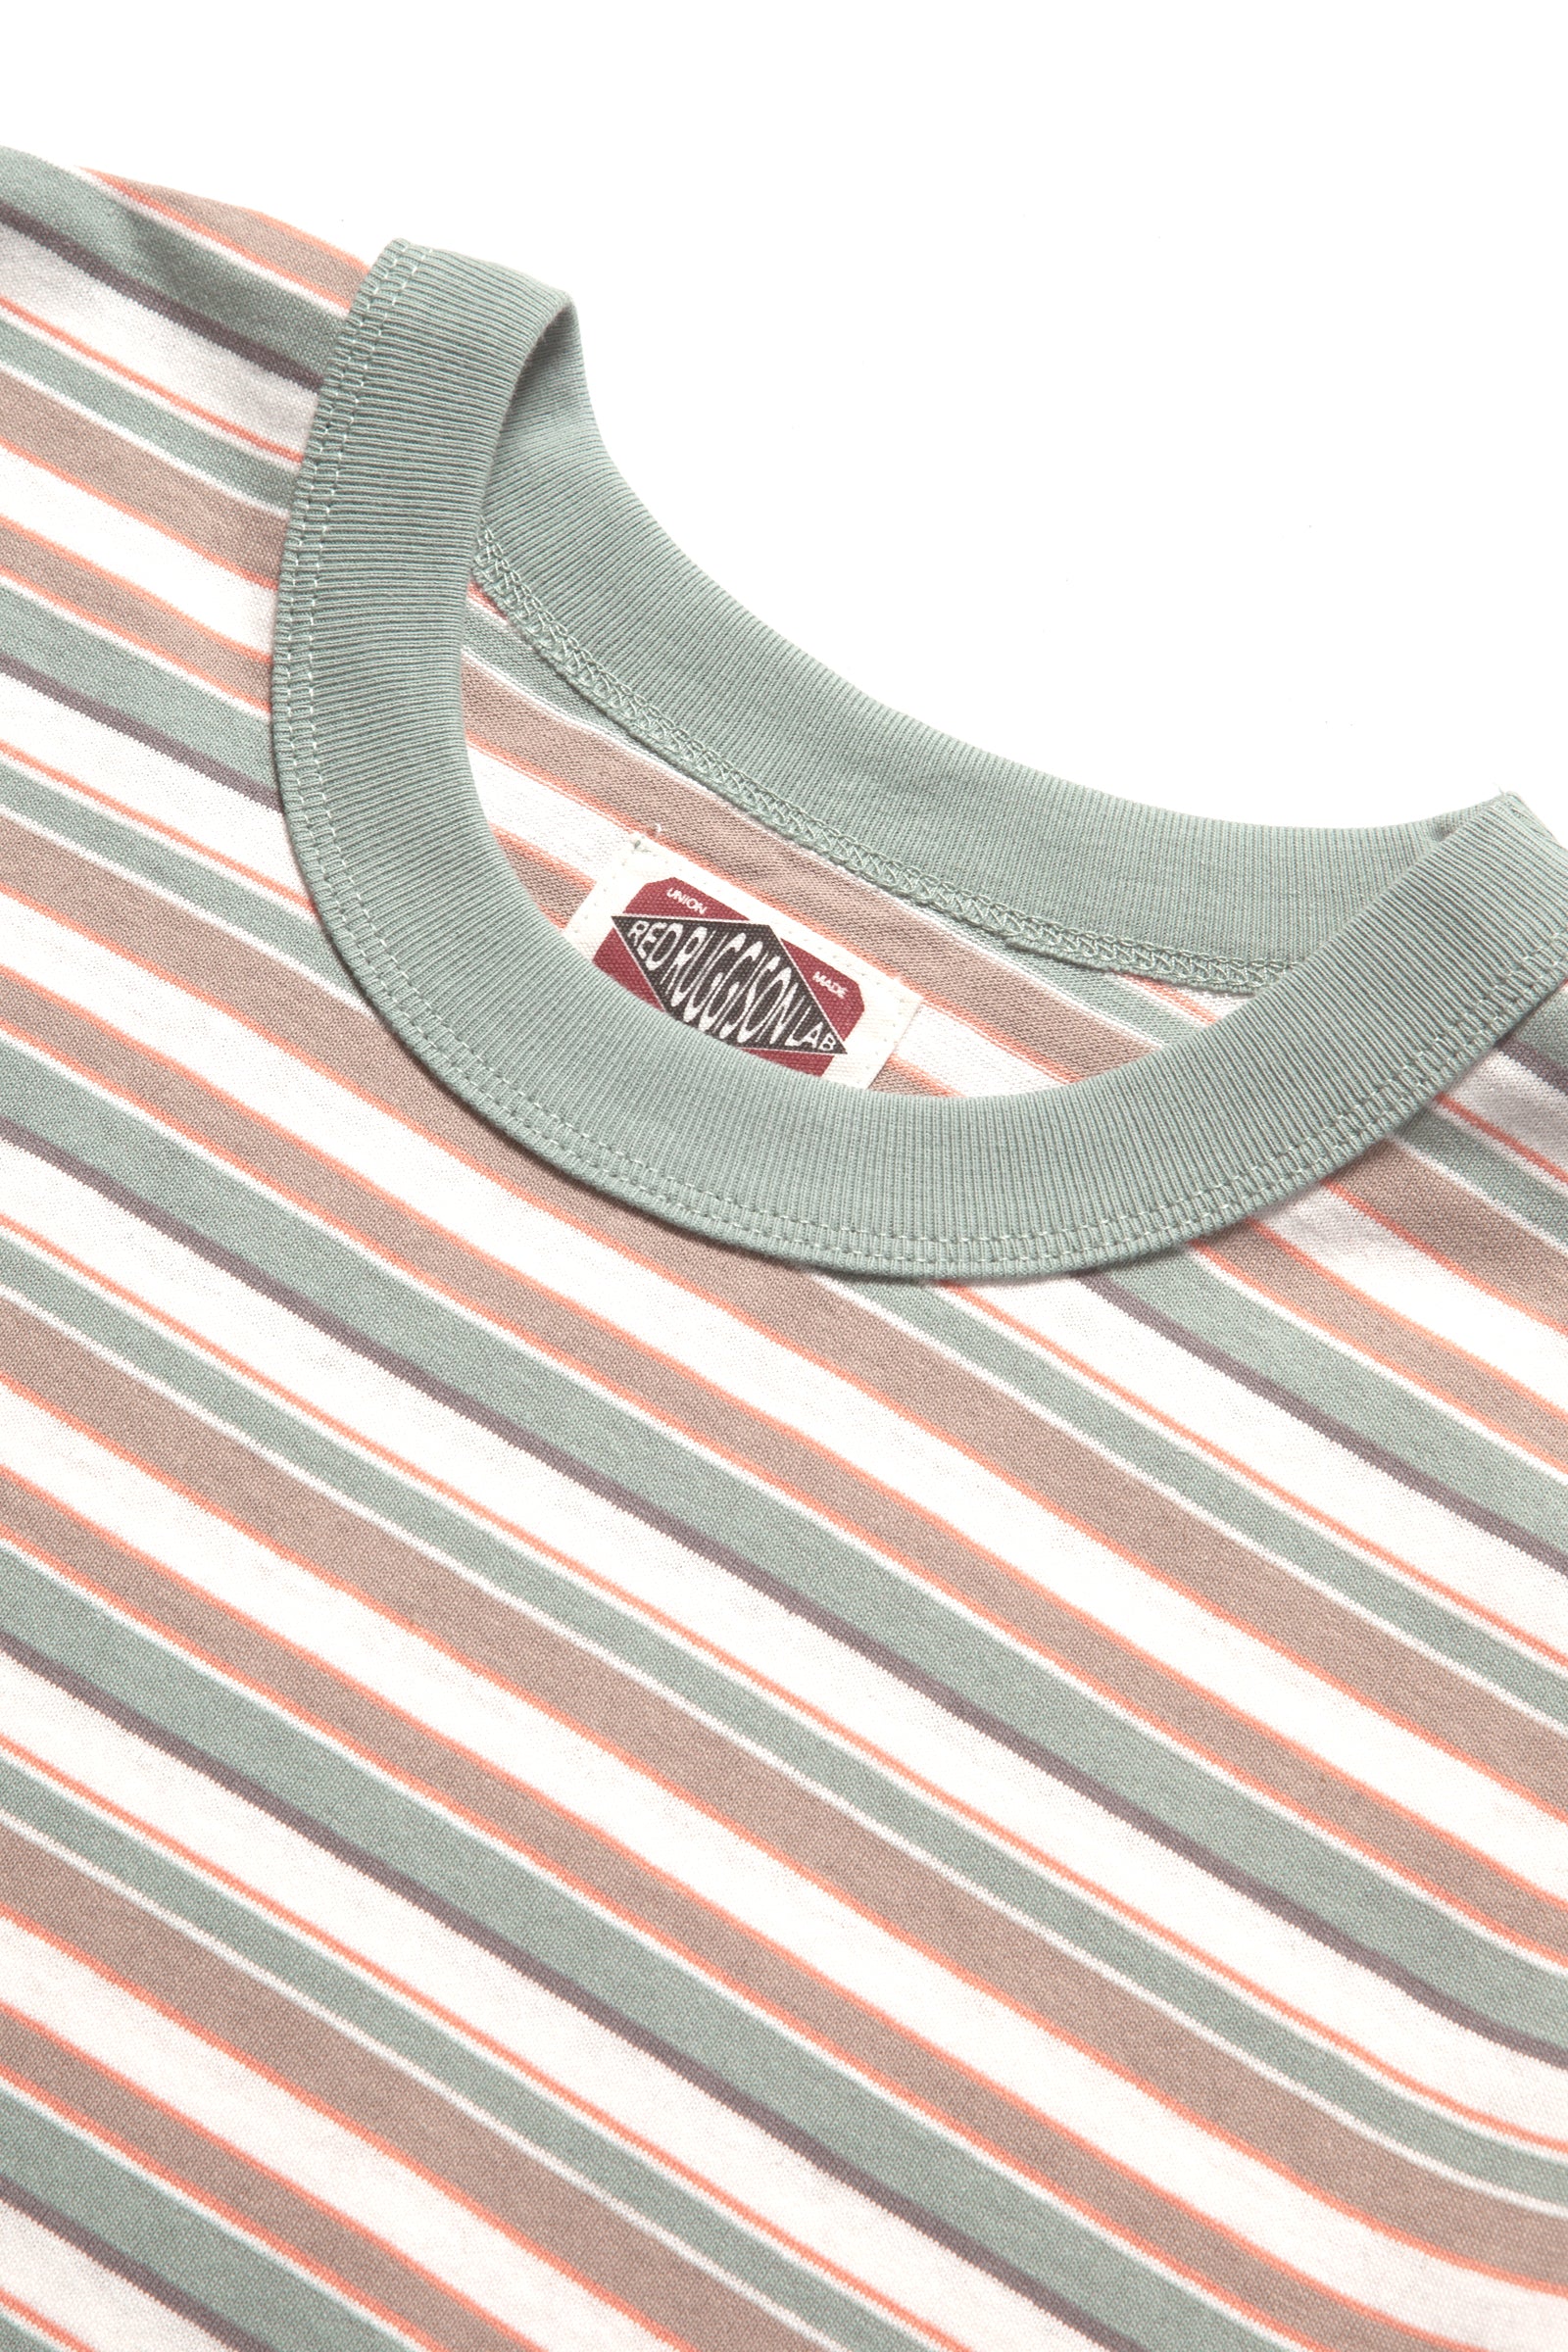 Red Ruggison - 90's Striped T-Shirt - White/Mint